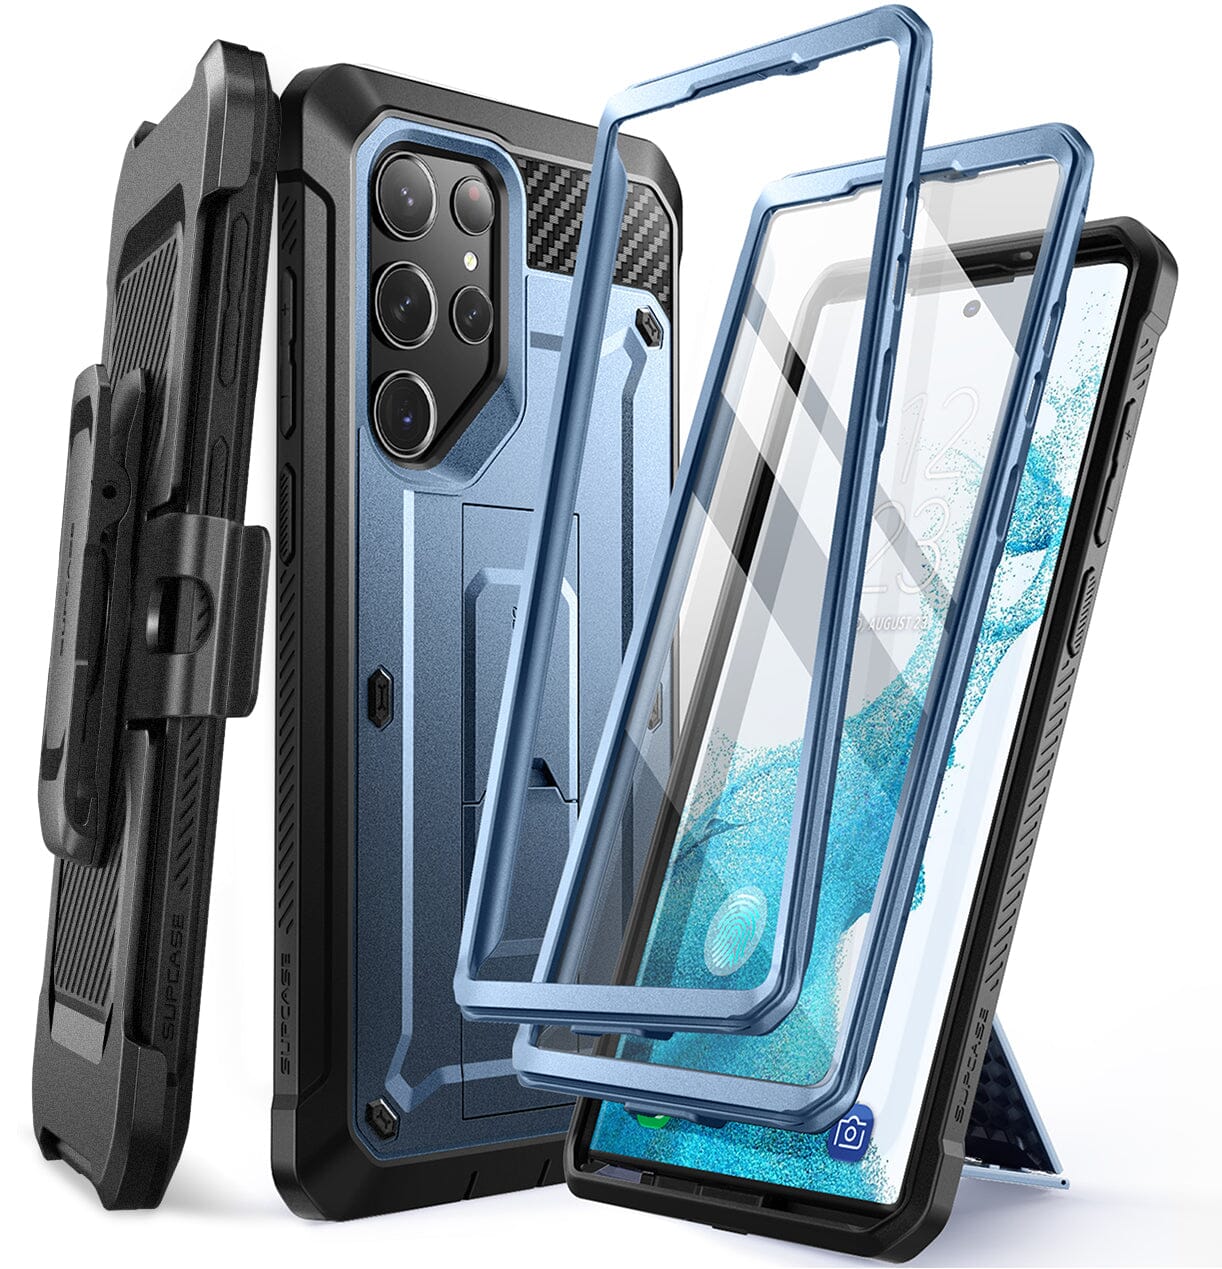 SUPCASE Unicorn Beetle Pro Case for Samsung Galaxy S23 Ultra 5G (2023 Release), [Extra Front Frame] Full-Body Dual Layer Rugged Belt-Clip & Kickstand Case with Built-in Screen Protector ONE2WORLD Metallic Blue 